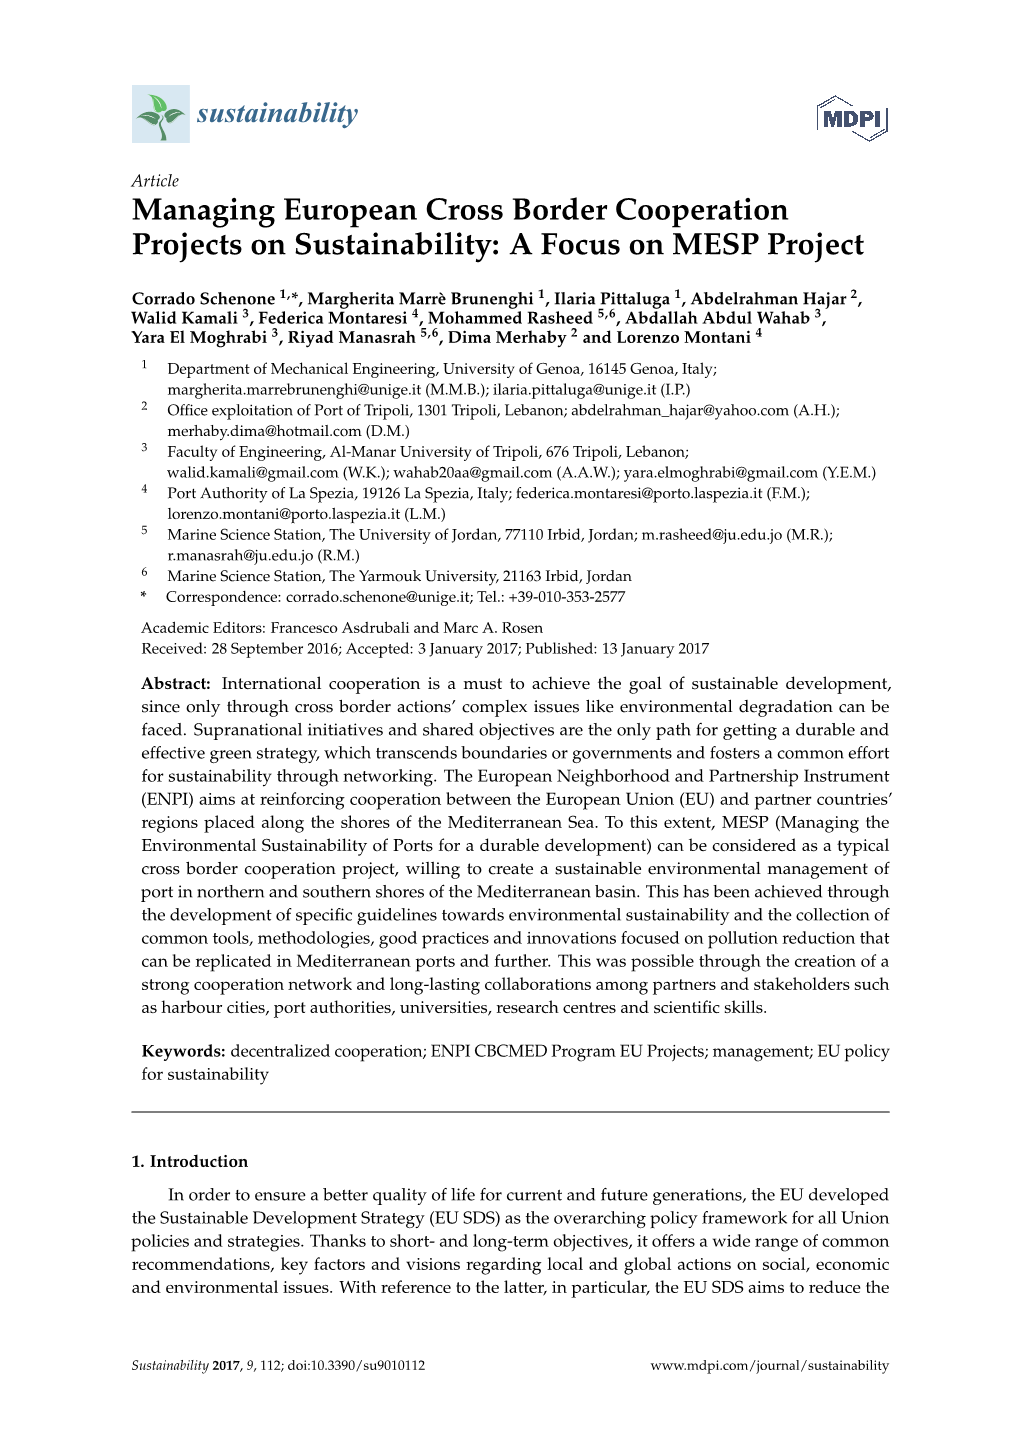 Managing European Cross Border Cooperation Projects on Sustainability: a Focus on MESP Project